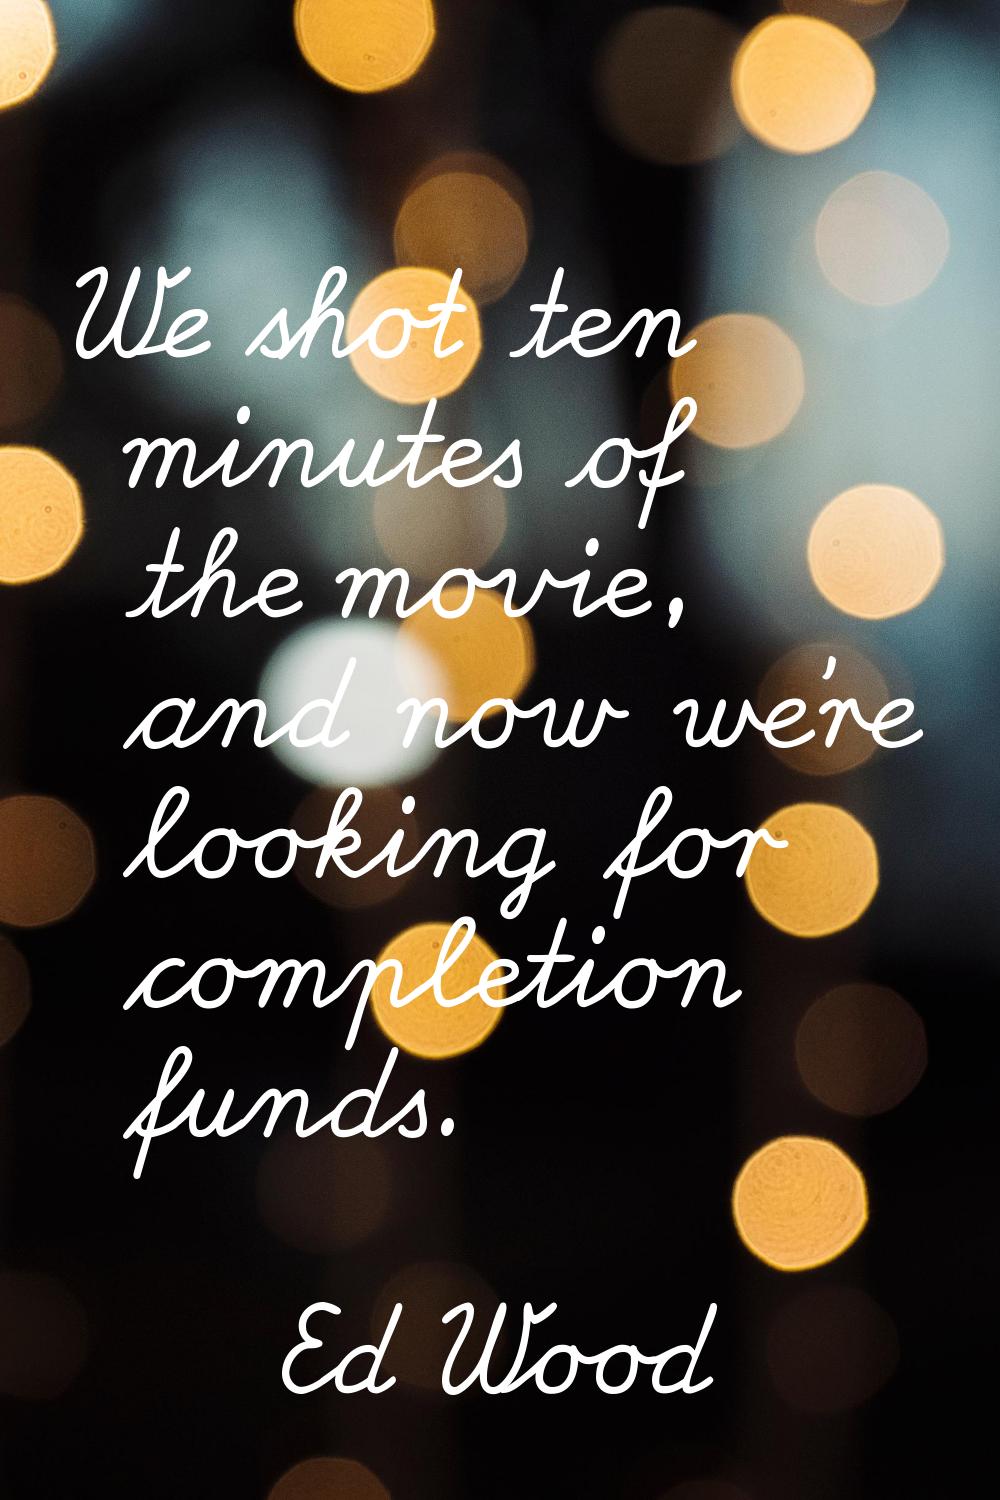 We shot ten minutes of the movie, and now we're looking for completion funds.